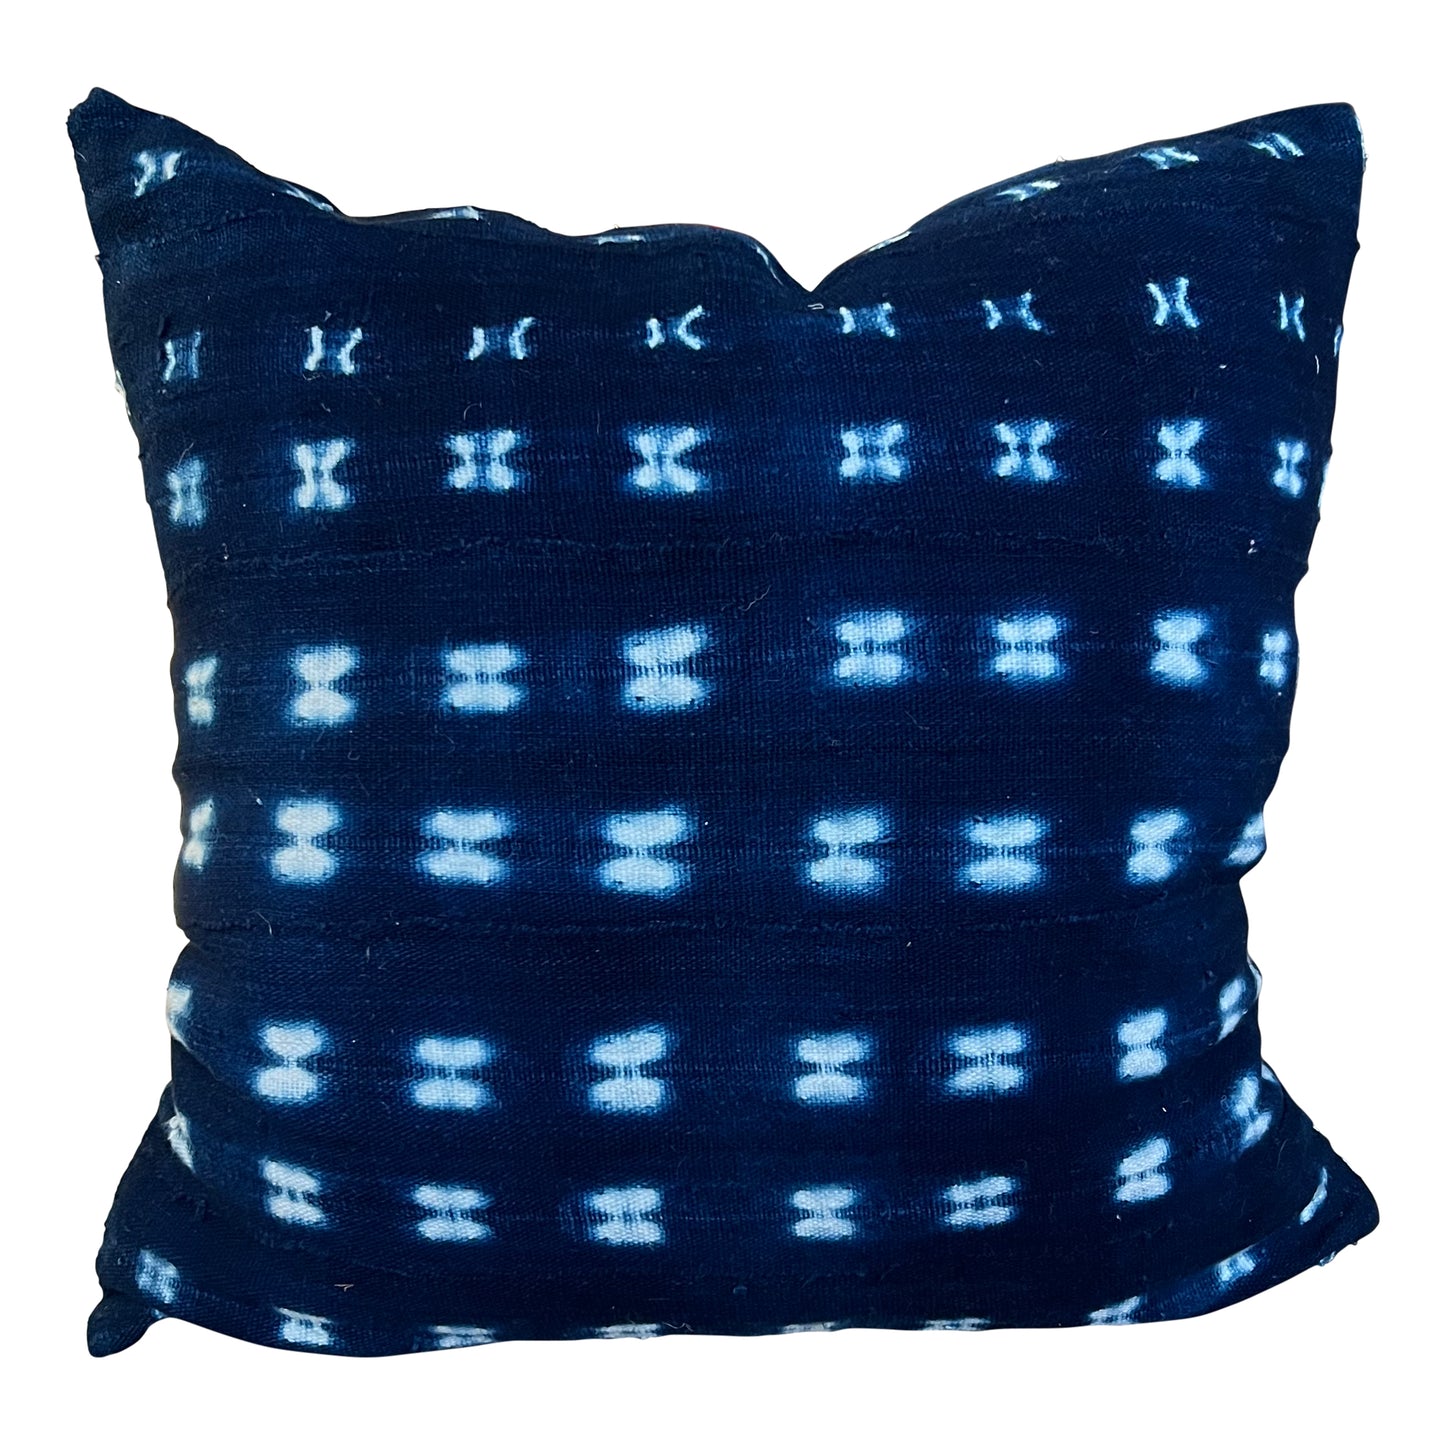 Mardell Mudcloth Pillow Cover